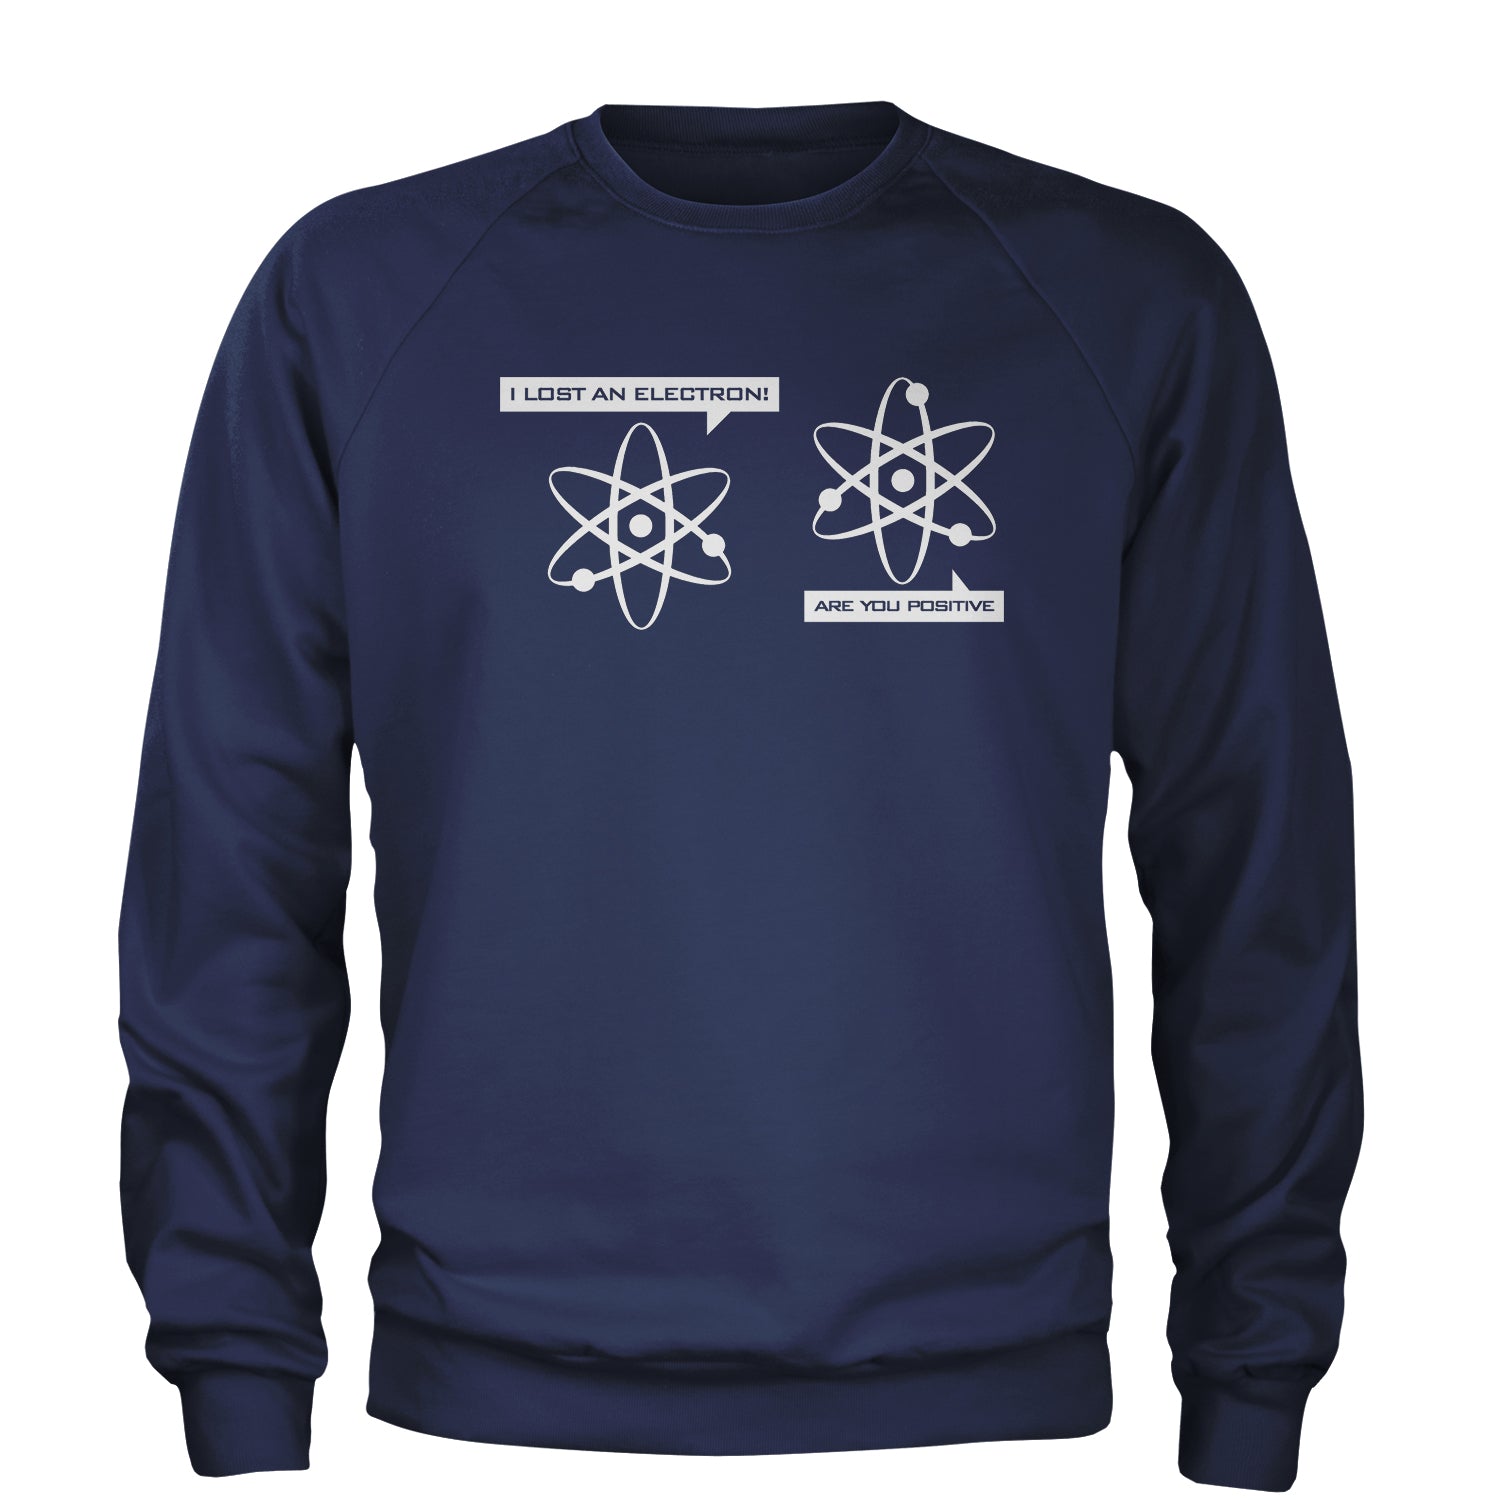 I Lost An Electron Funny Physics Adult Crewneck Sweatshirt an, are, chemistry, clothing, electron, funny, I, lost, physics, positive, this, thiswear, wear, you by Expression Tees